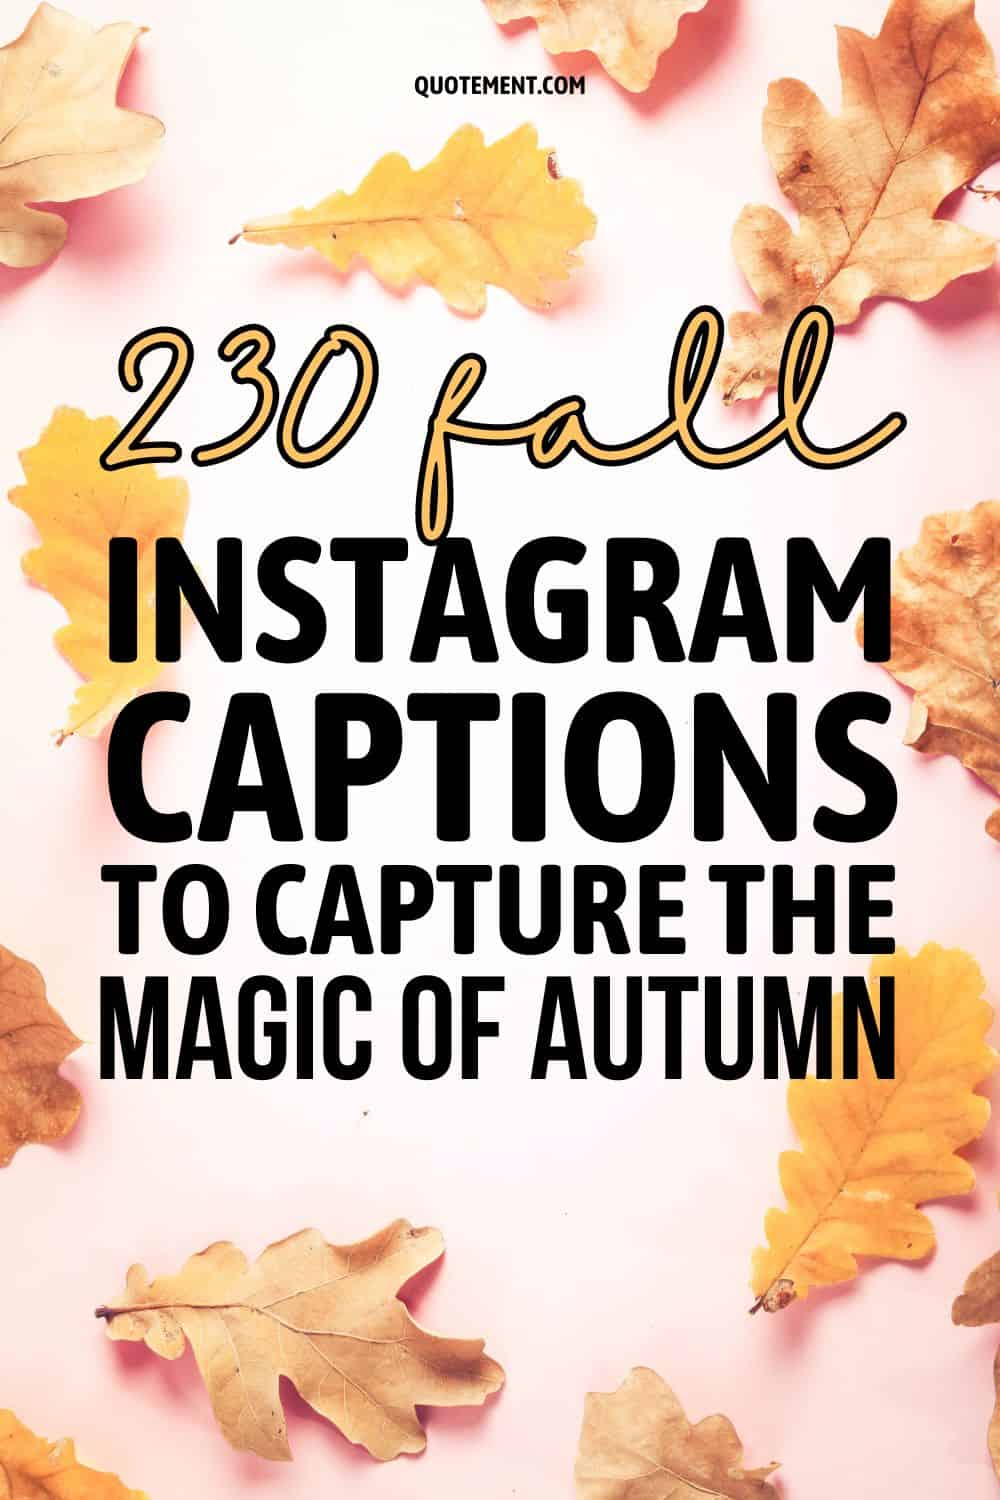 230 Fall Instagram Captions To Capture The Magic Of Autumn 